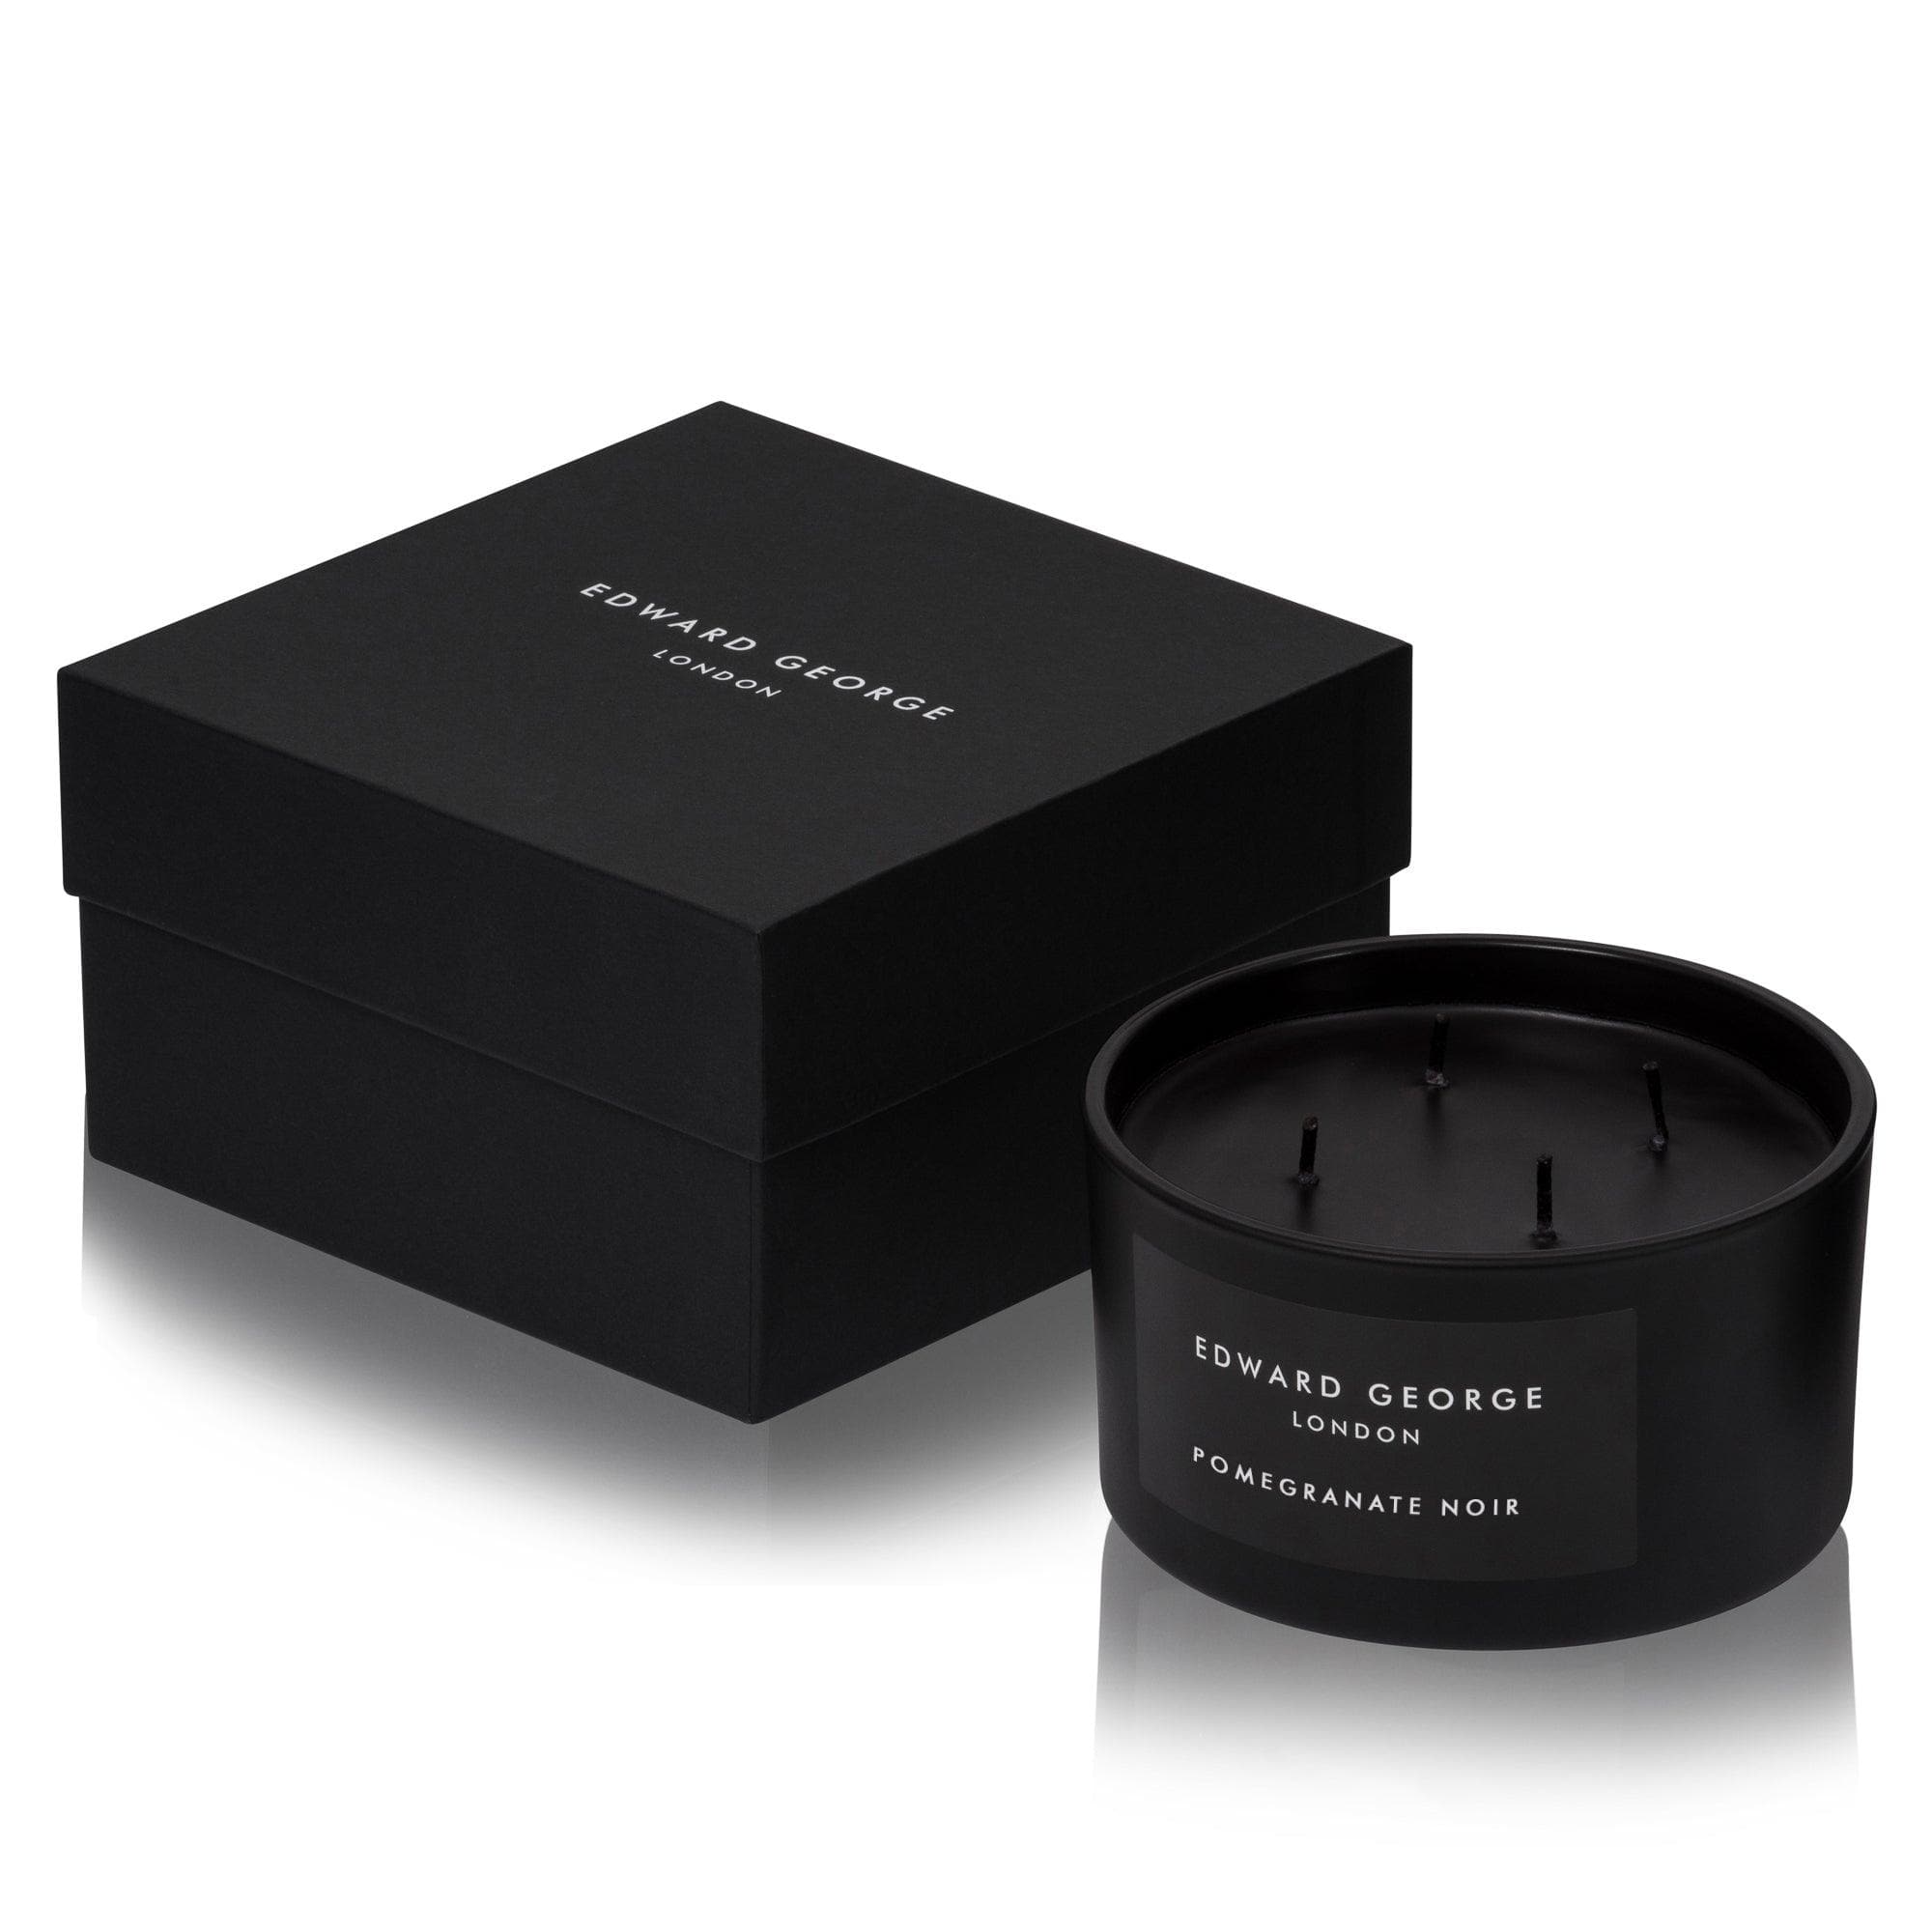 pomegranate noir candles home fragrance decor room living edward george london luxury gift ritual scent set lid black wax best wax scented candle women men large